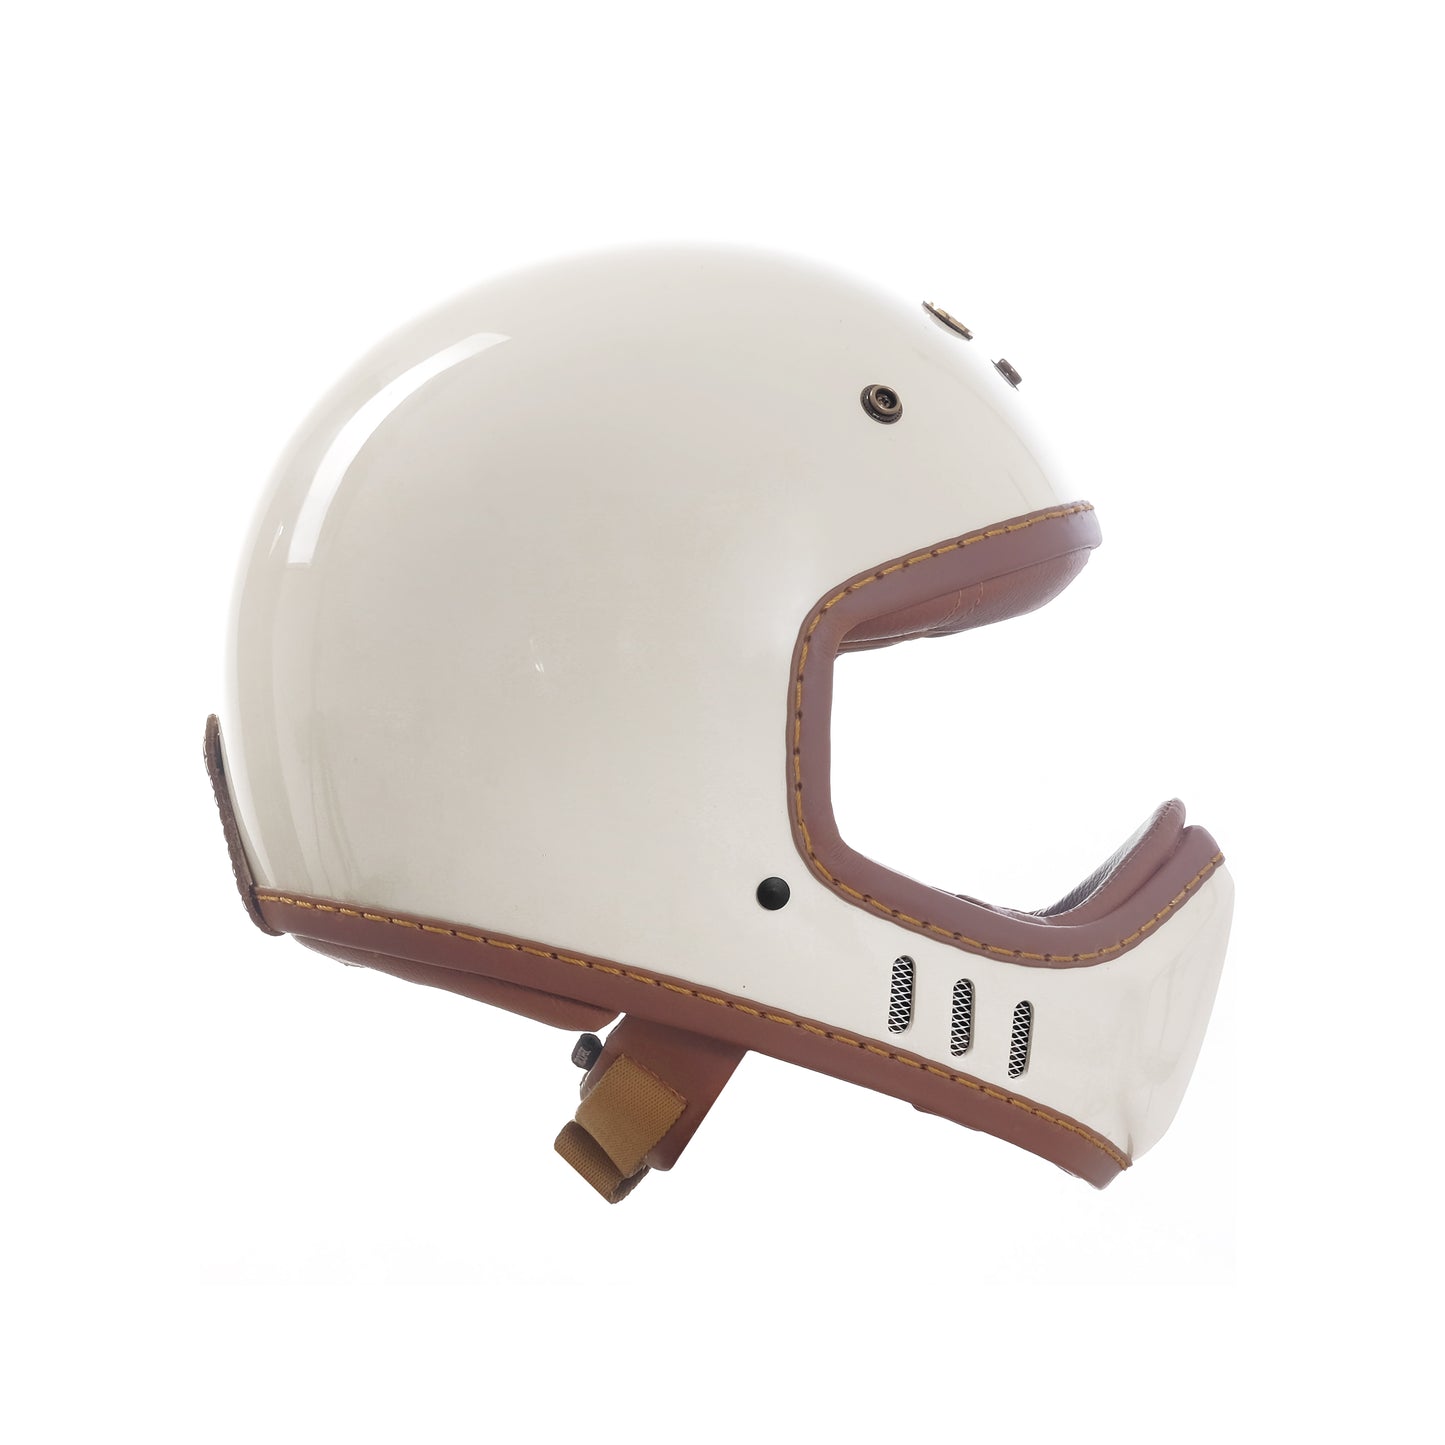 X9 Leather Series Helmet - Special Edition